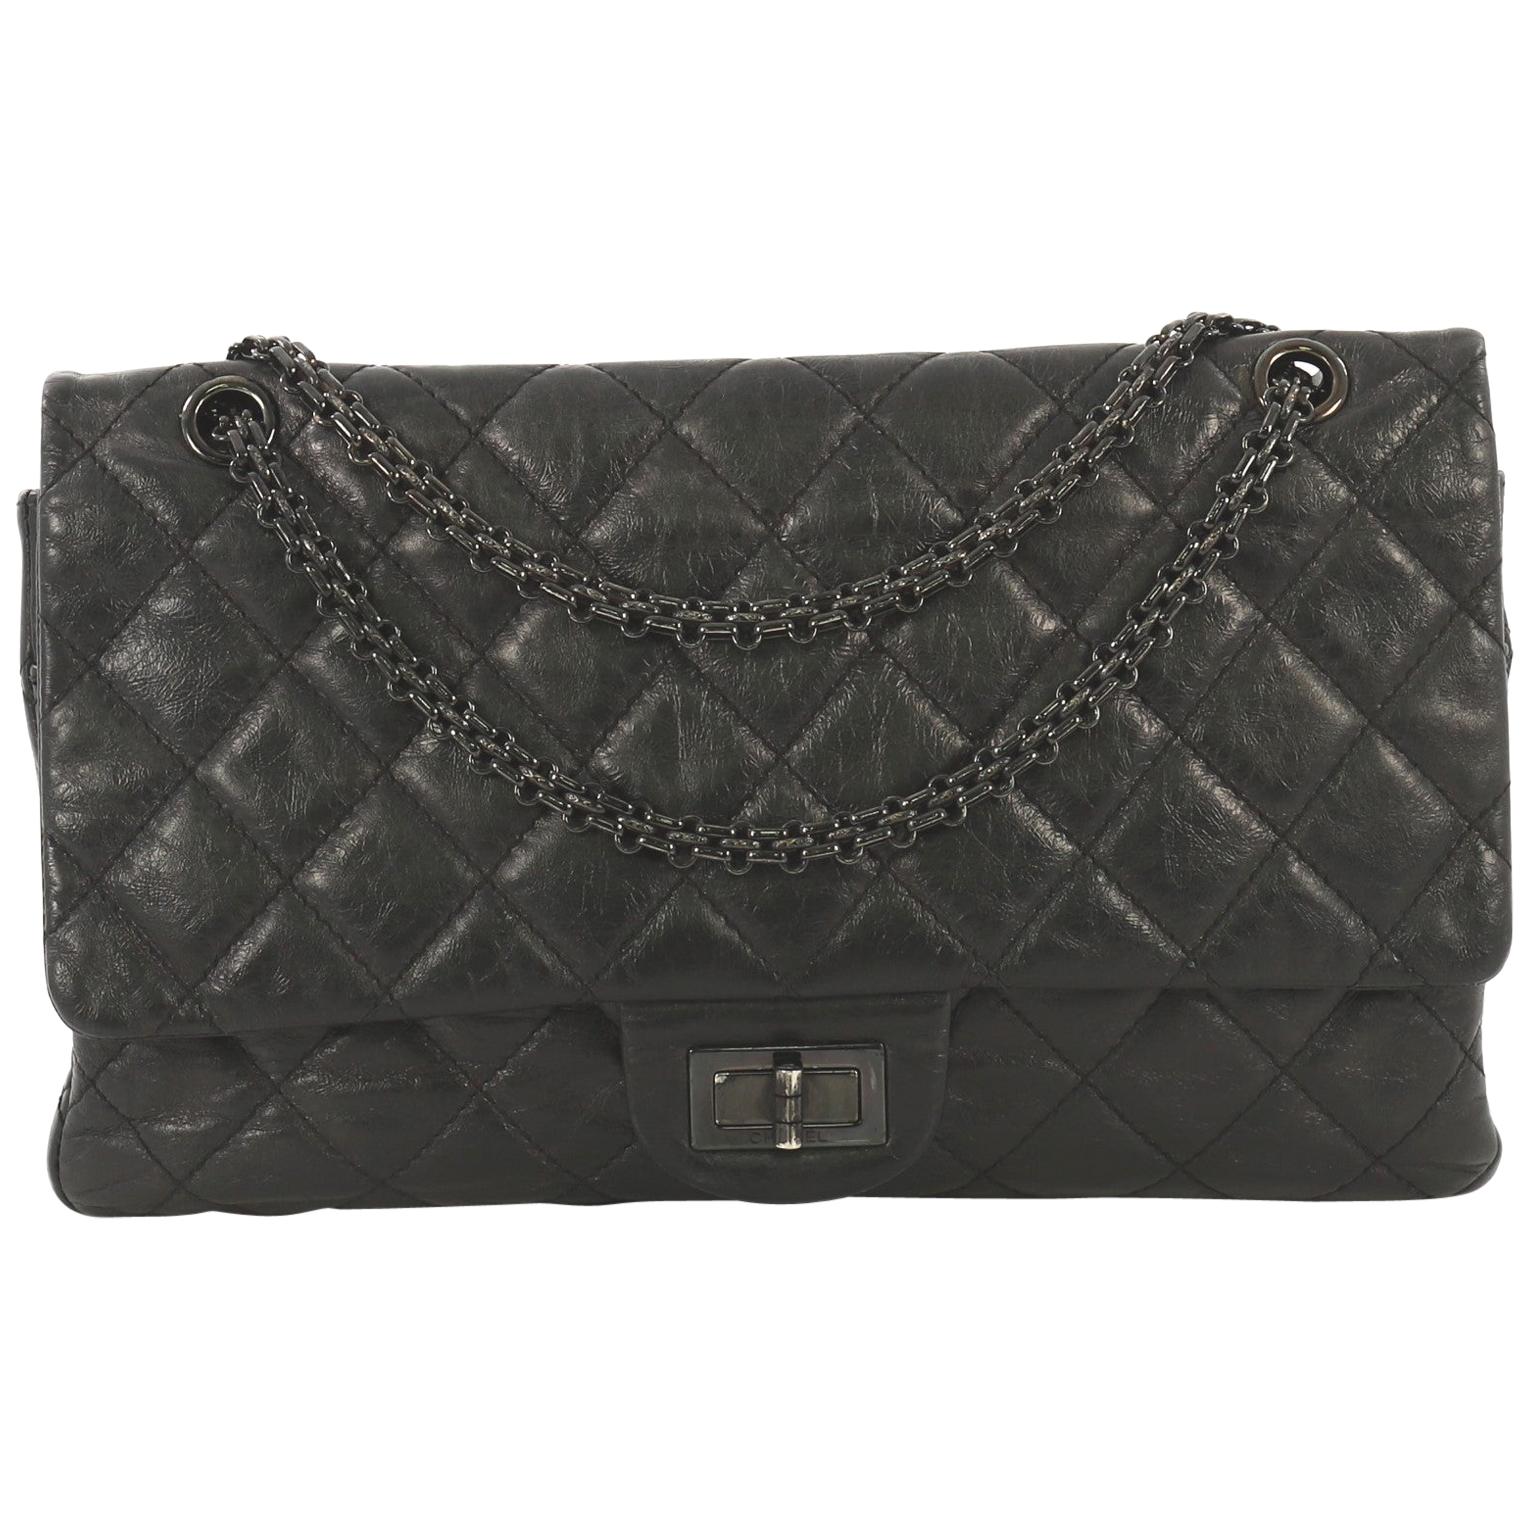 Chanel So Black Reissue 2.55 Flap Bag Quilted Glazed Aged Calfskin 227